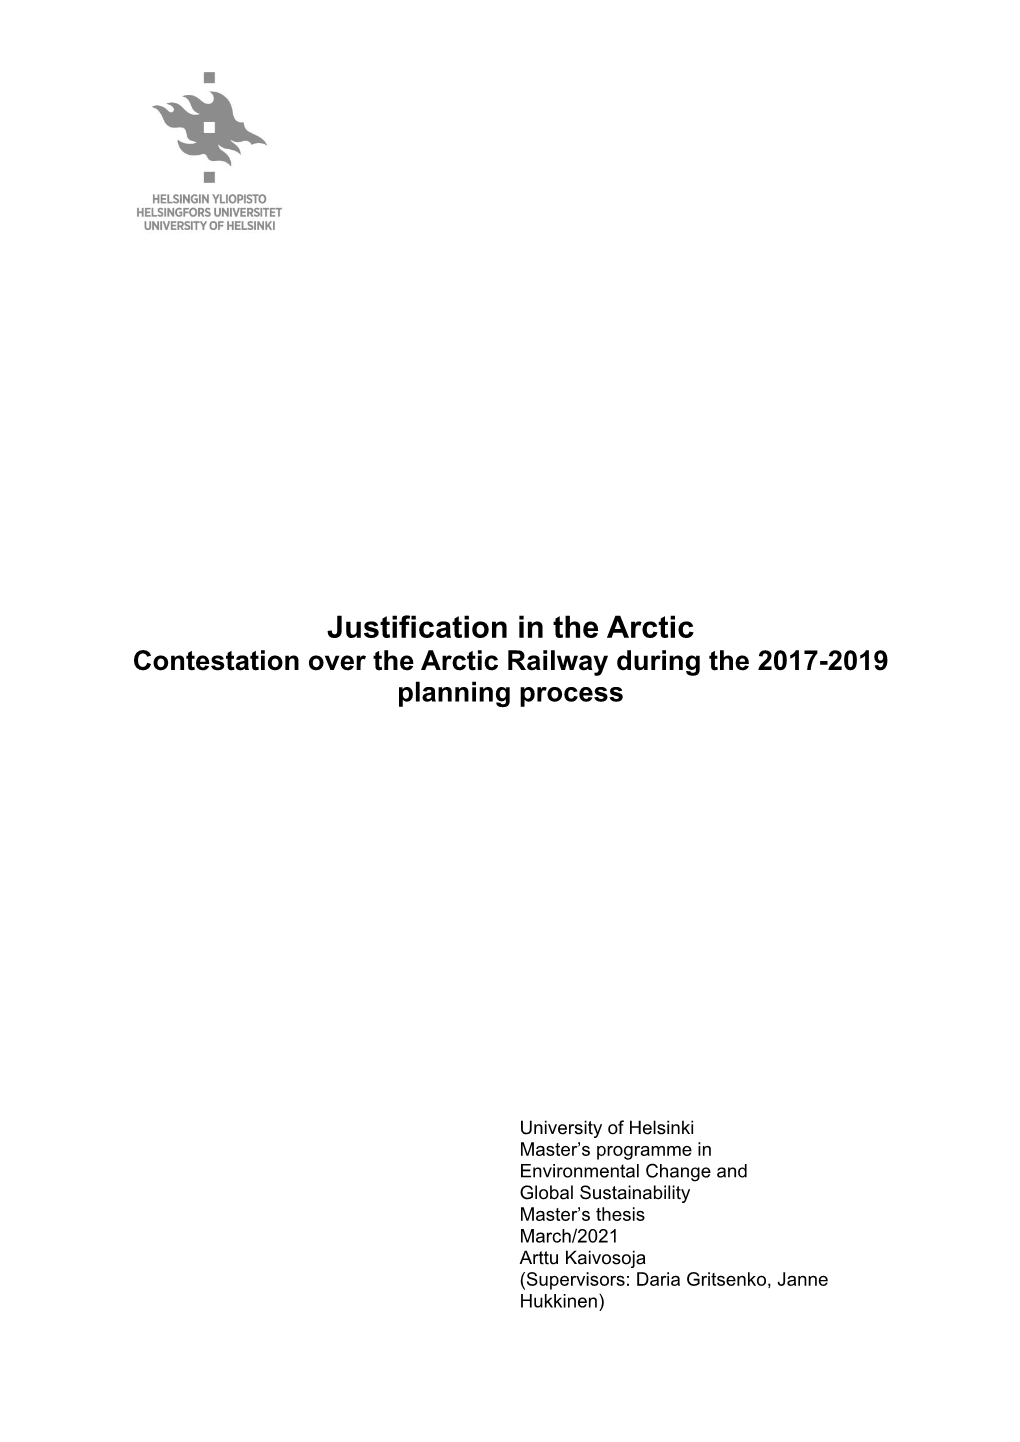 Justification in the Arctic Contestation Over the Arctic Railway During the 2017-2019 Planning Process